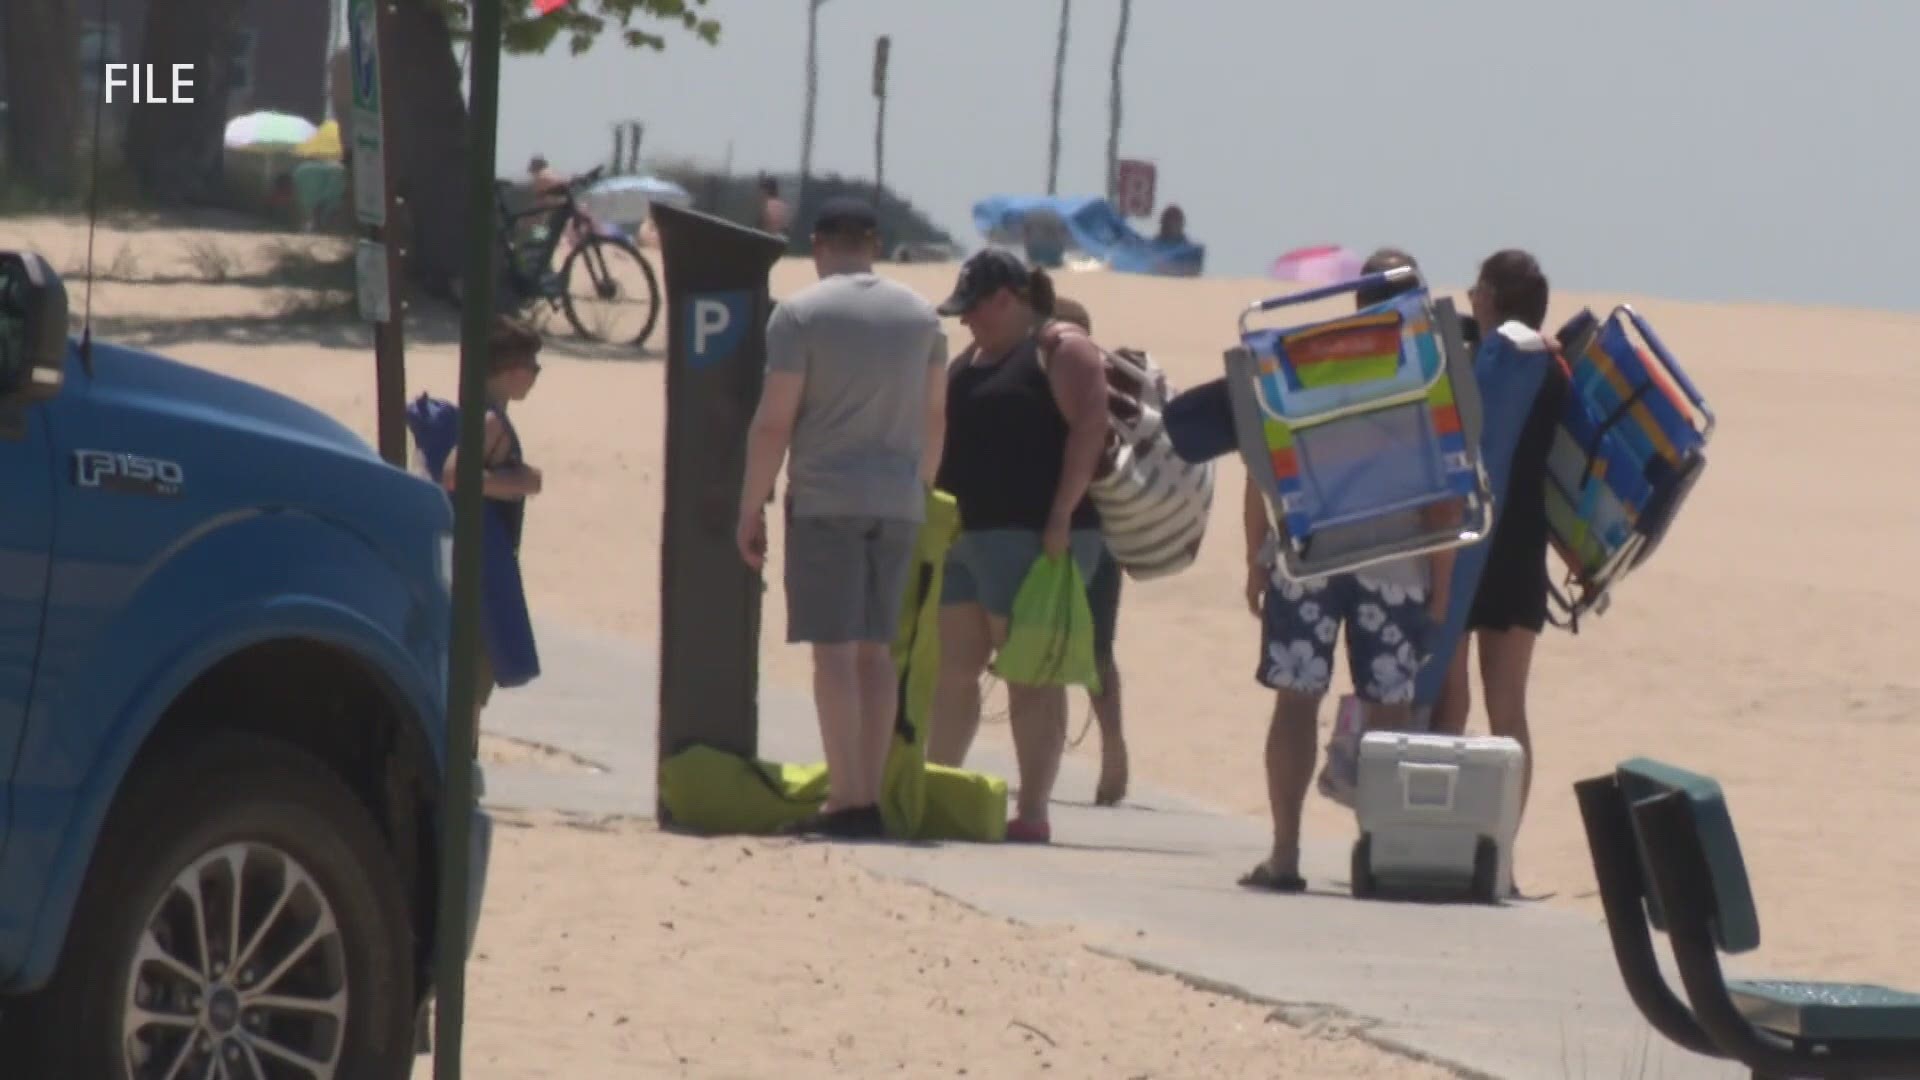 Muskegon City Hall is issuing a final notice for people to request and pick-up beach parking passes for the season.